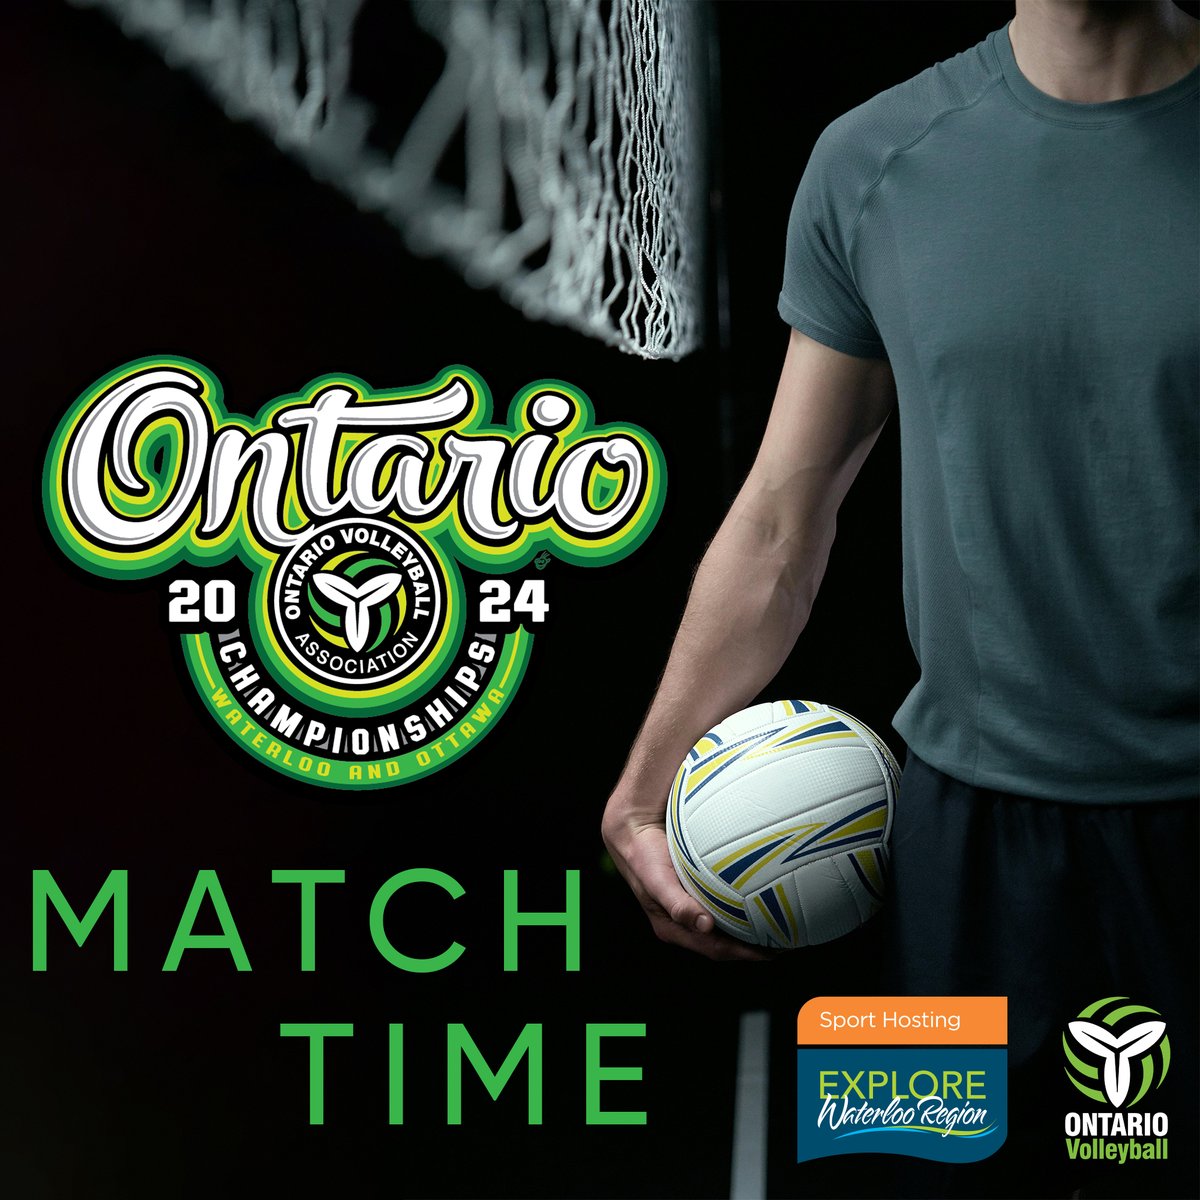 It's match time! 🏐 The @ova_updates #Volleyball #Championships kick off today in @citywaterloo. Get ready for epic #serves and #spikes! #OntarioVolleyball #WaterlooRegion #OVAChamps #ExploreWR #LocalPride